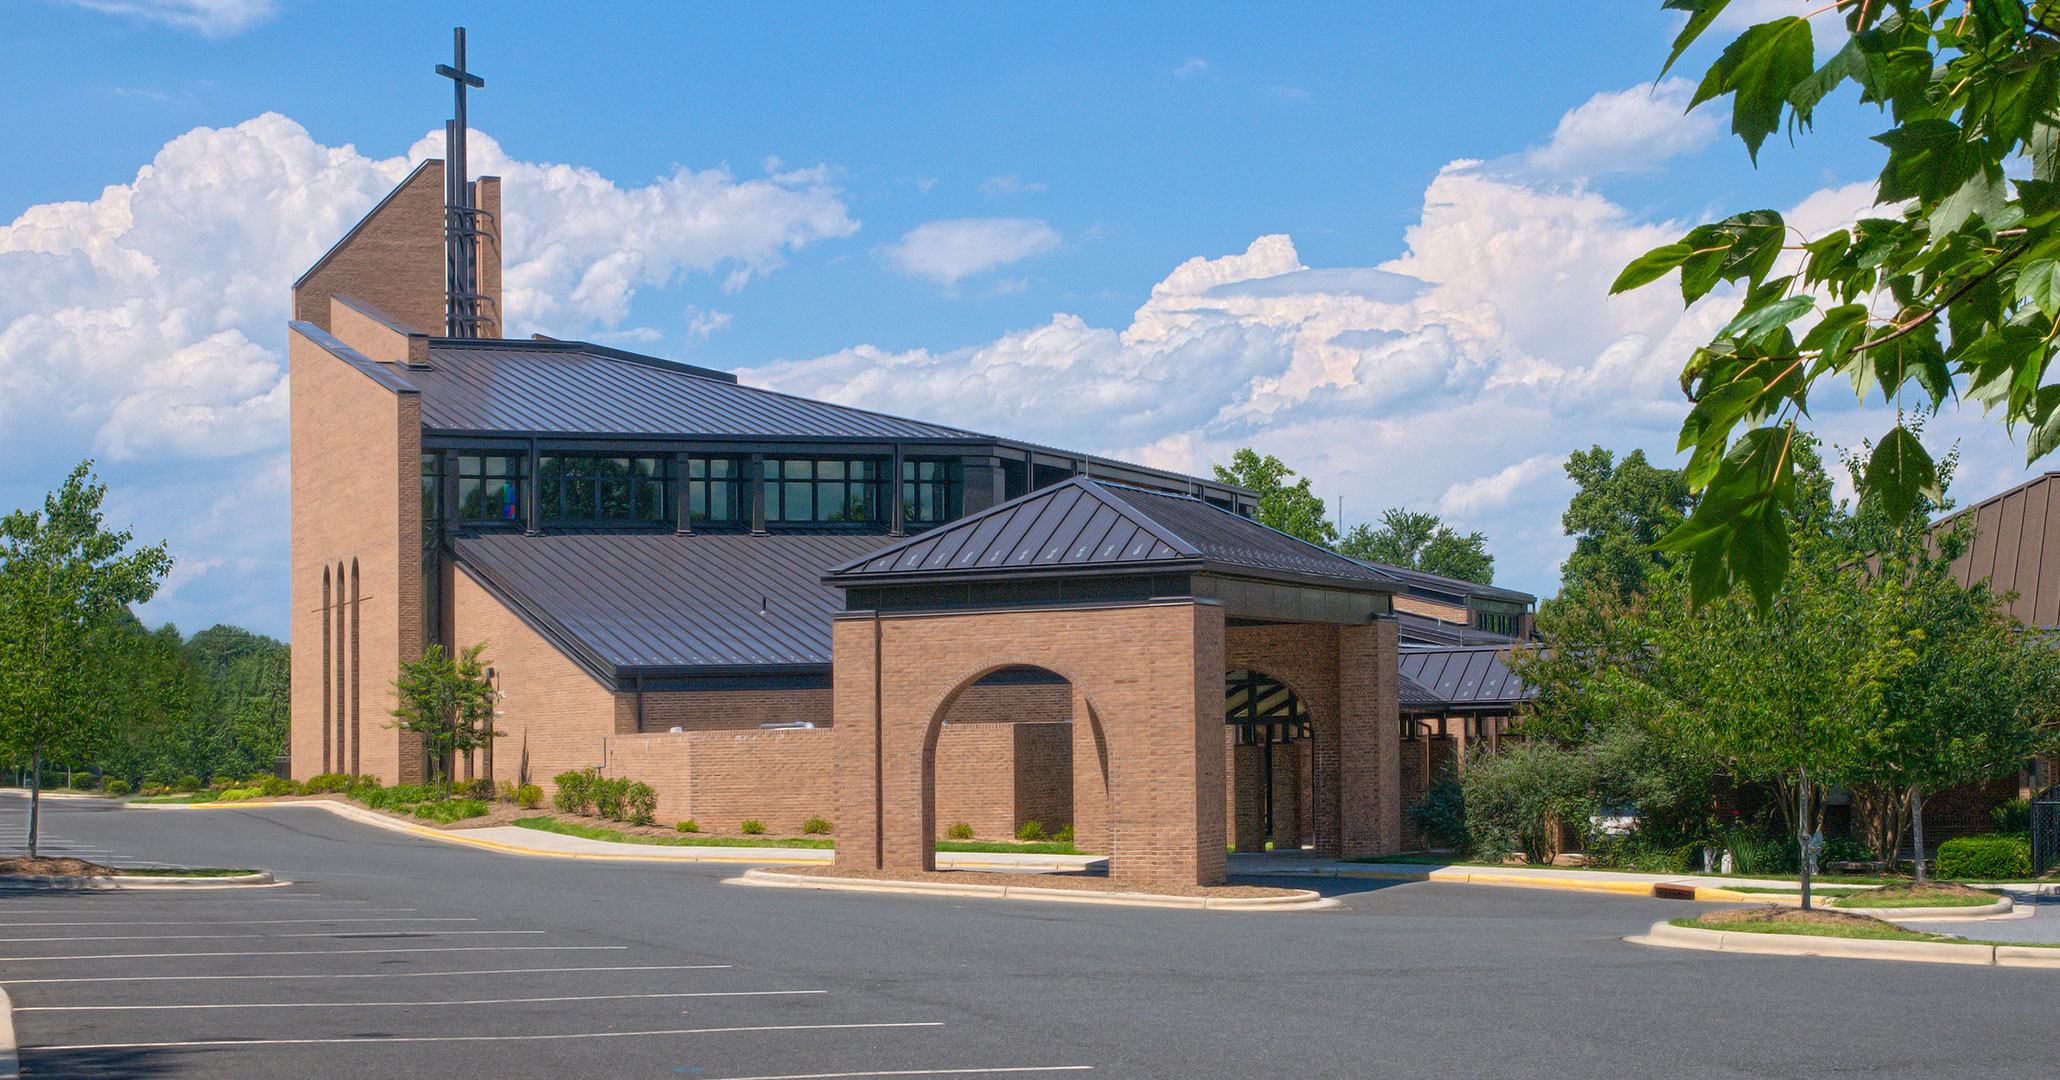 Boudreaux architects are experienced designing Catholic churches.